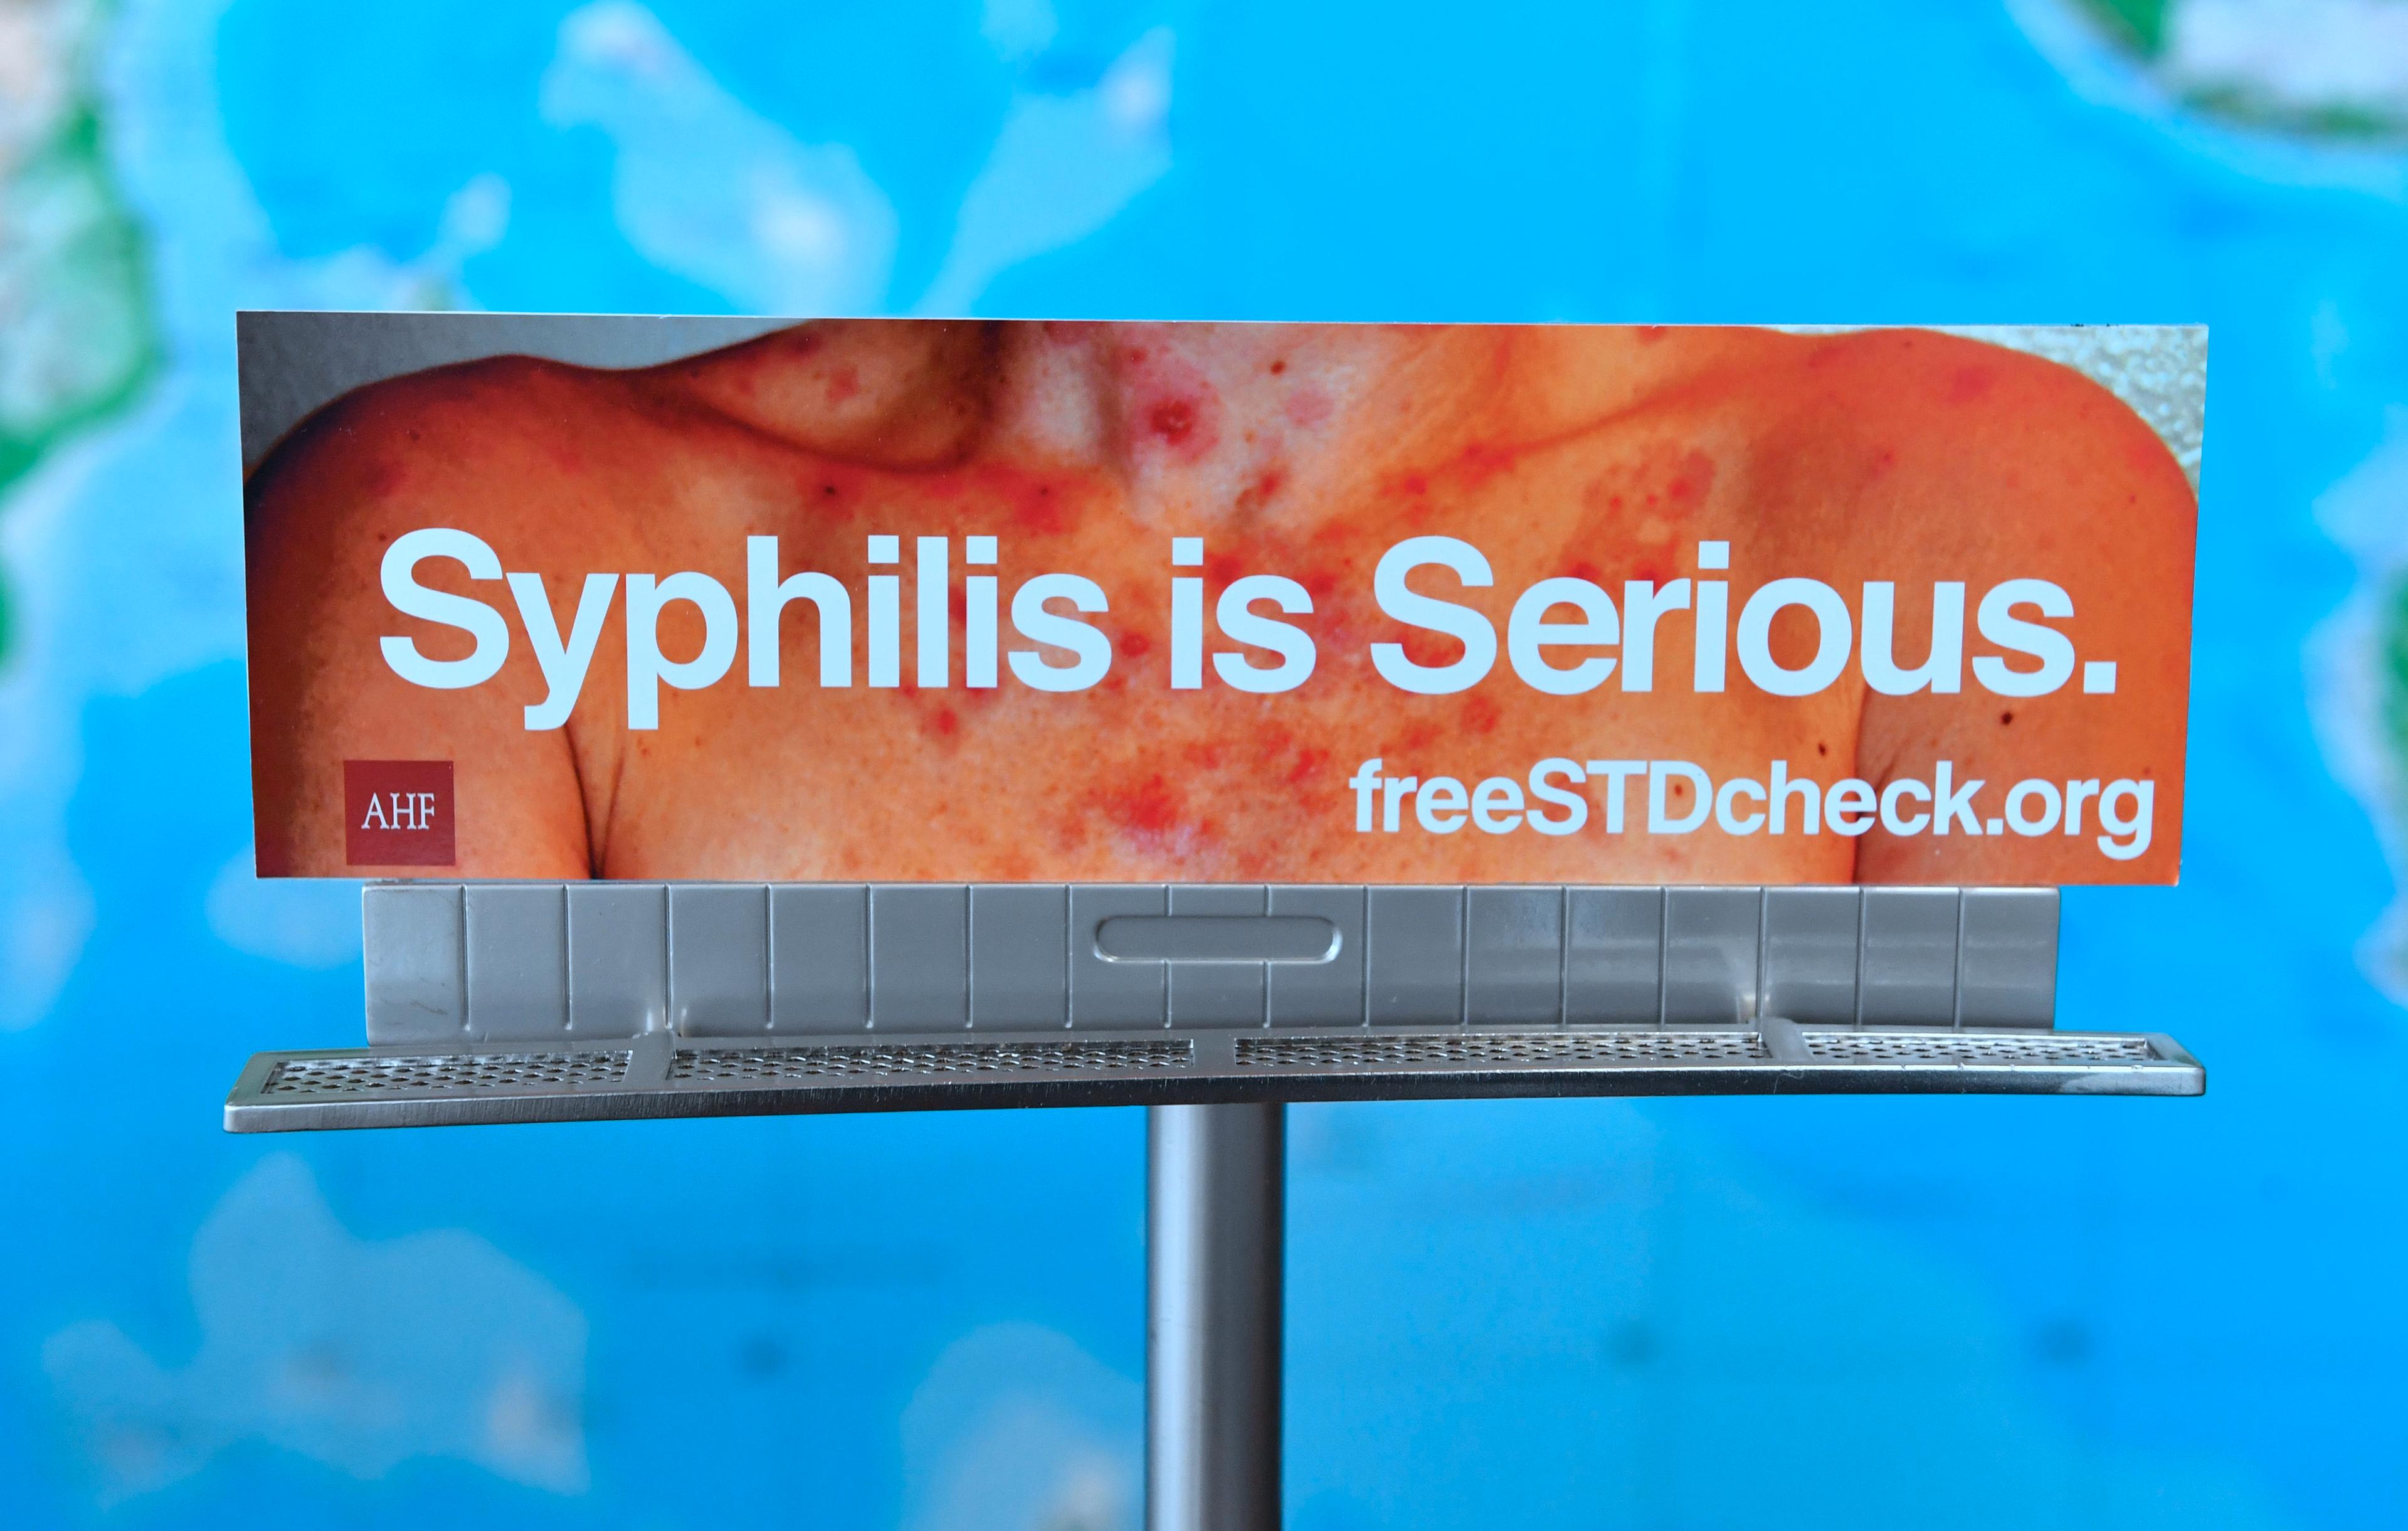 Congenital syphilis jumped tenfold over the last decade